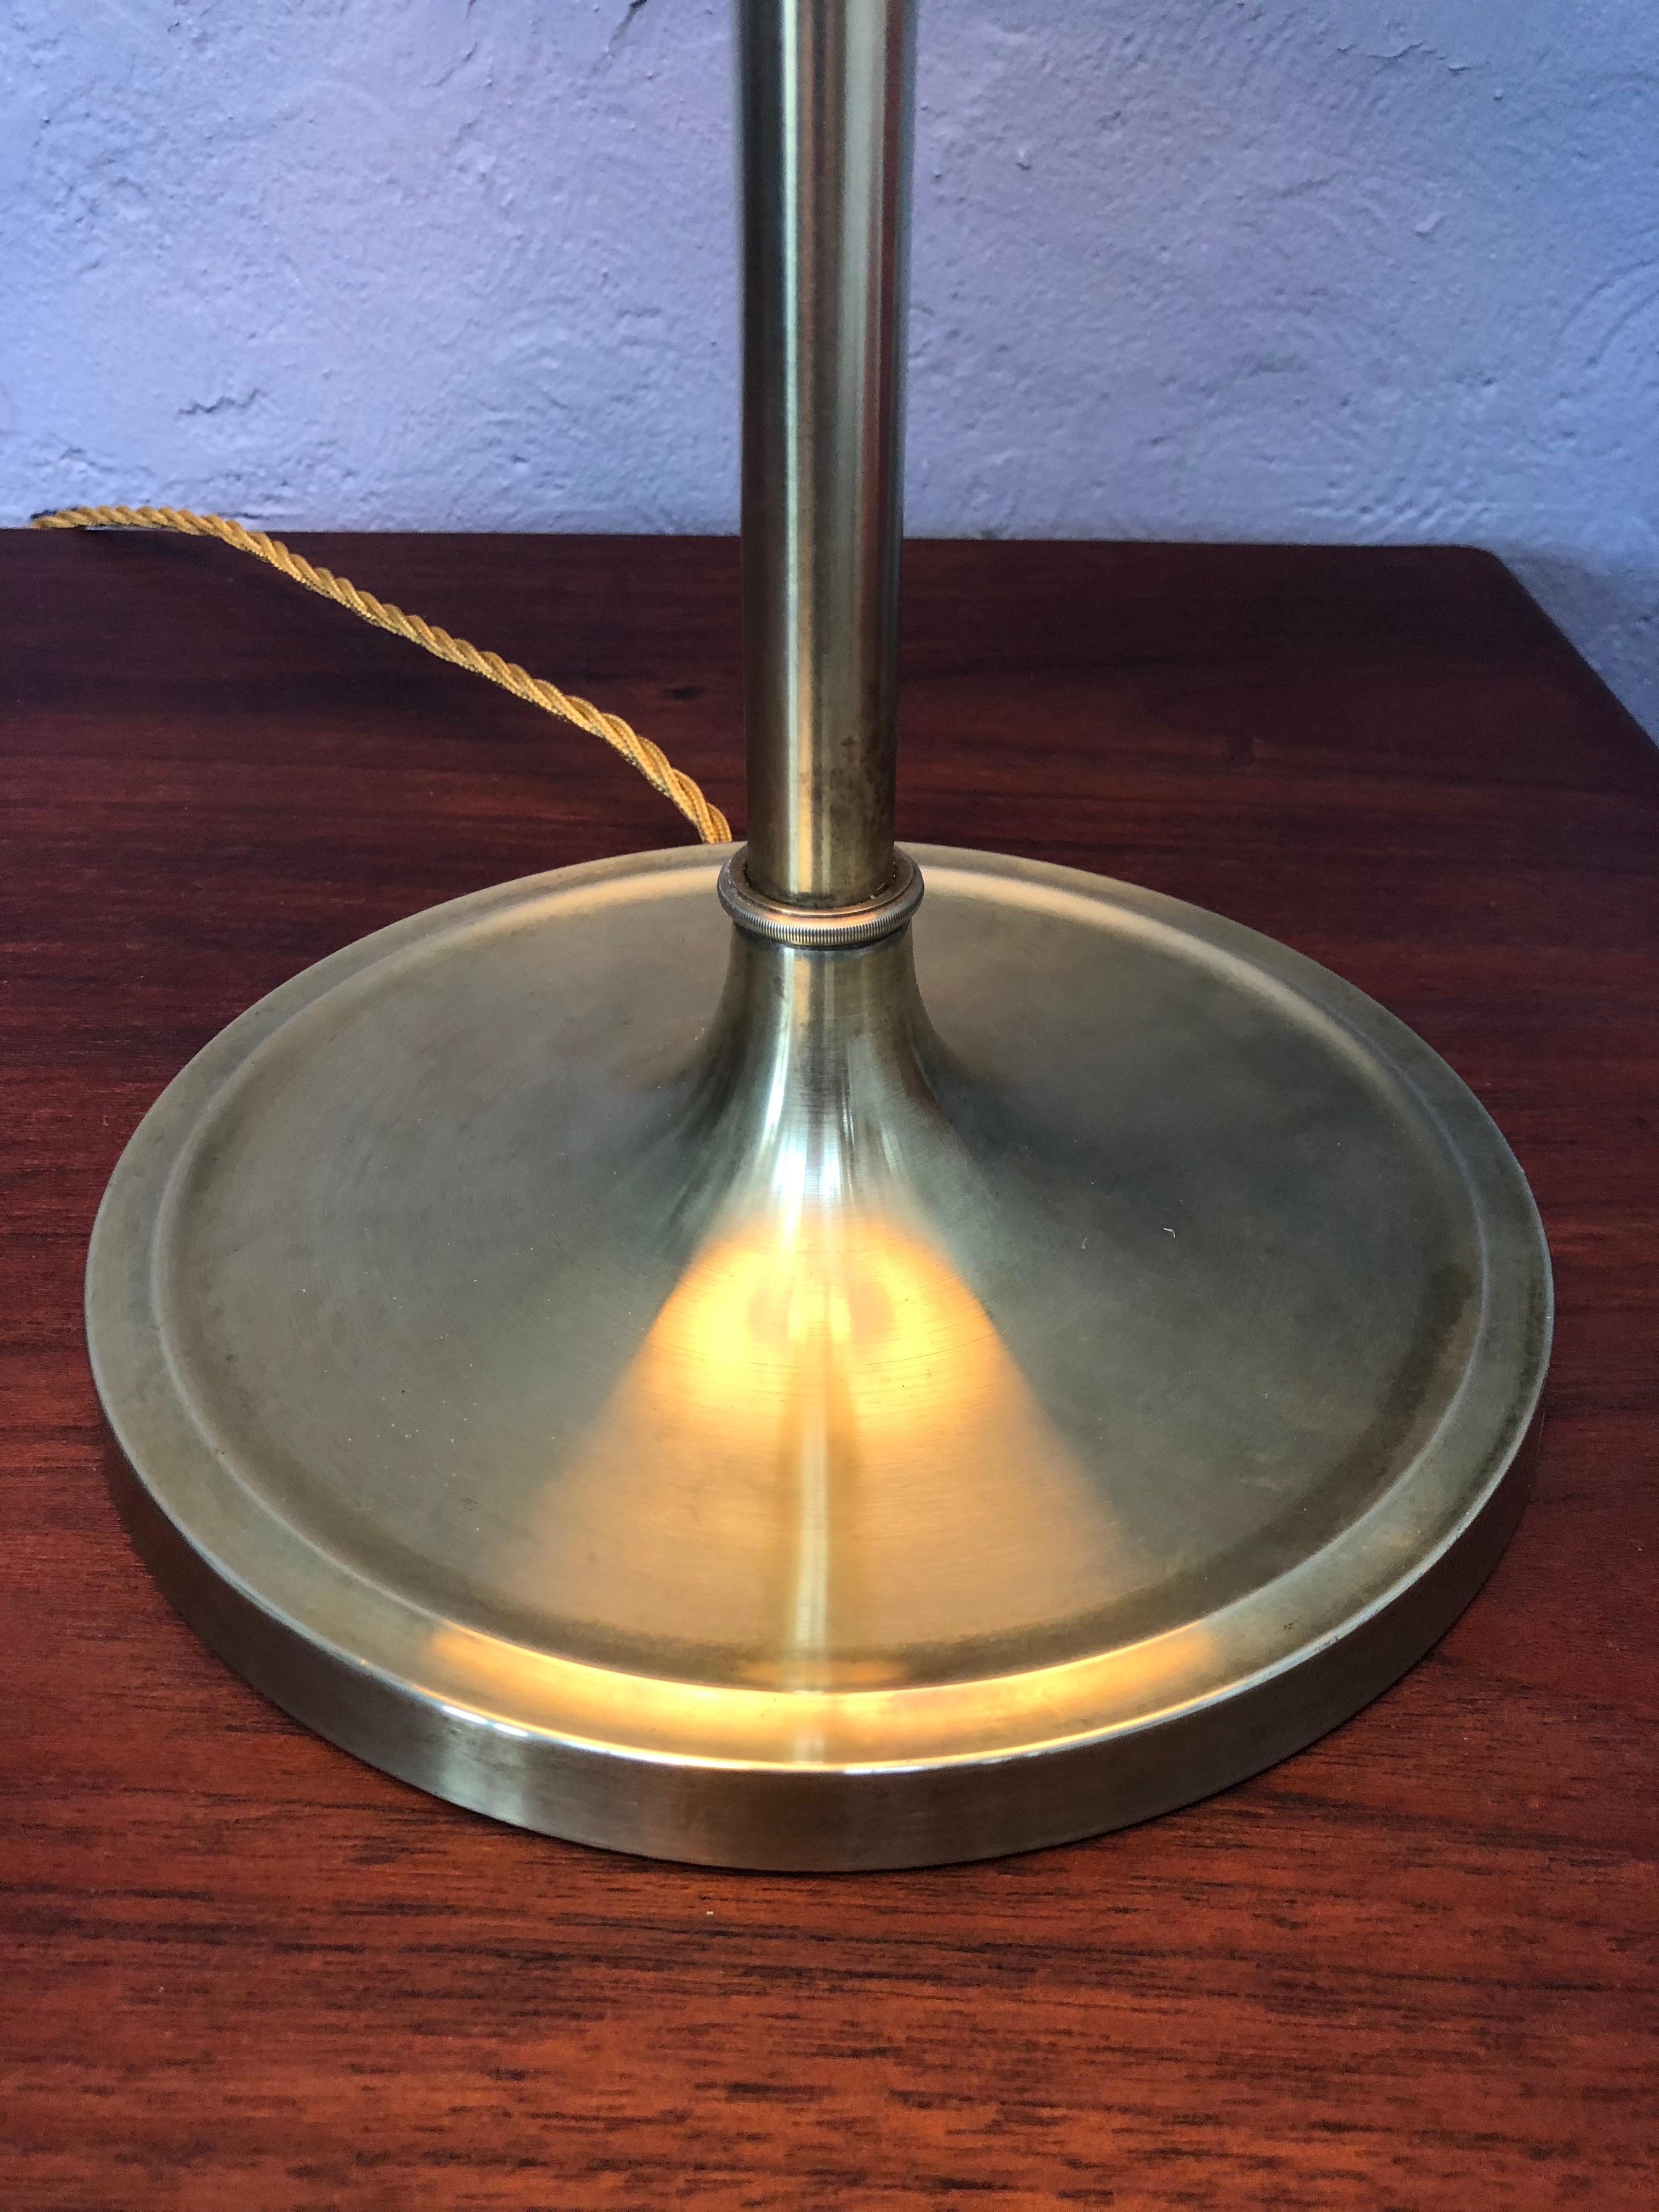 Danish Vintage Pair of Brass Table Lamps by Esben Klint for Le Klint from the 1950s For Sale